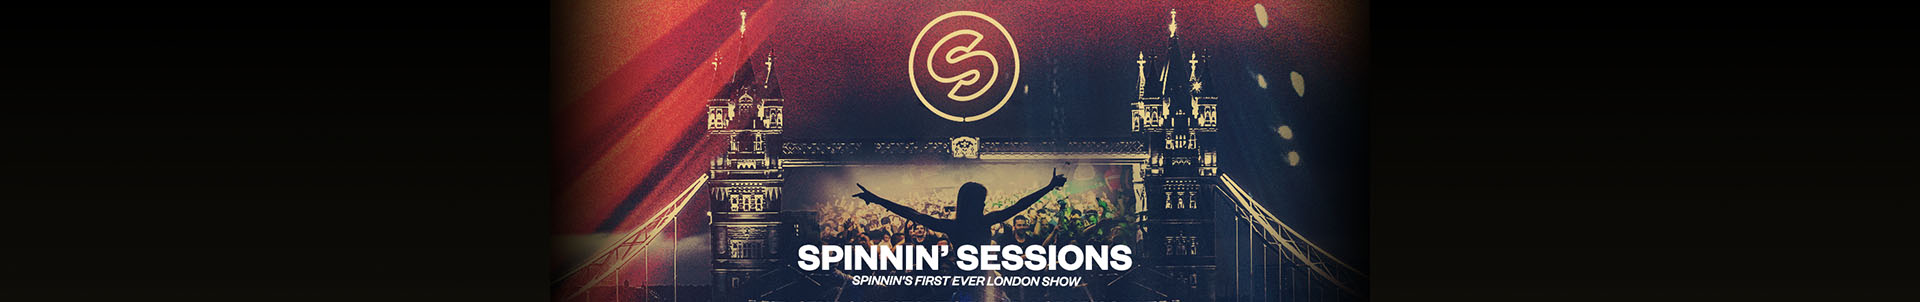 BLR warms up for Spinnin' Sessions London